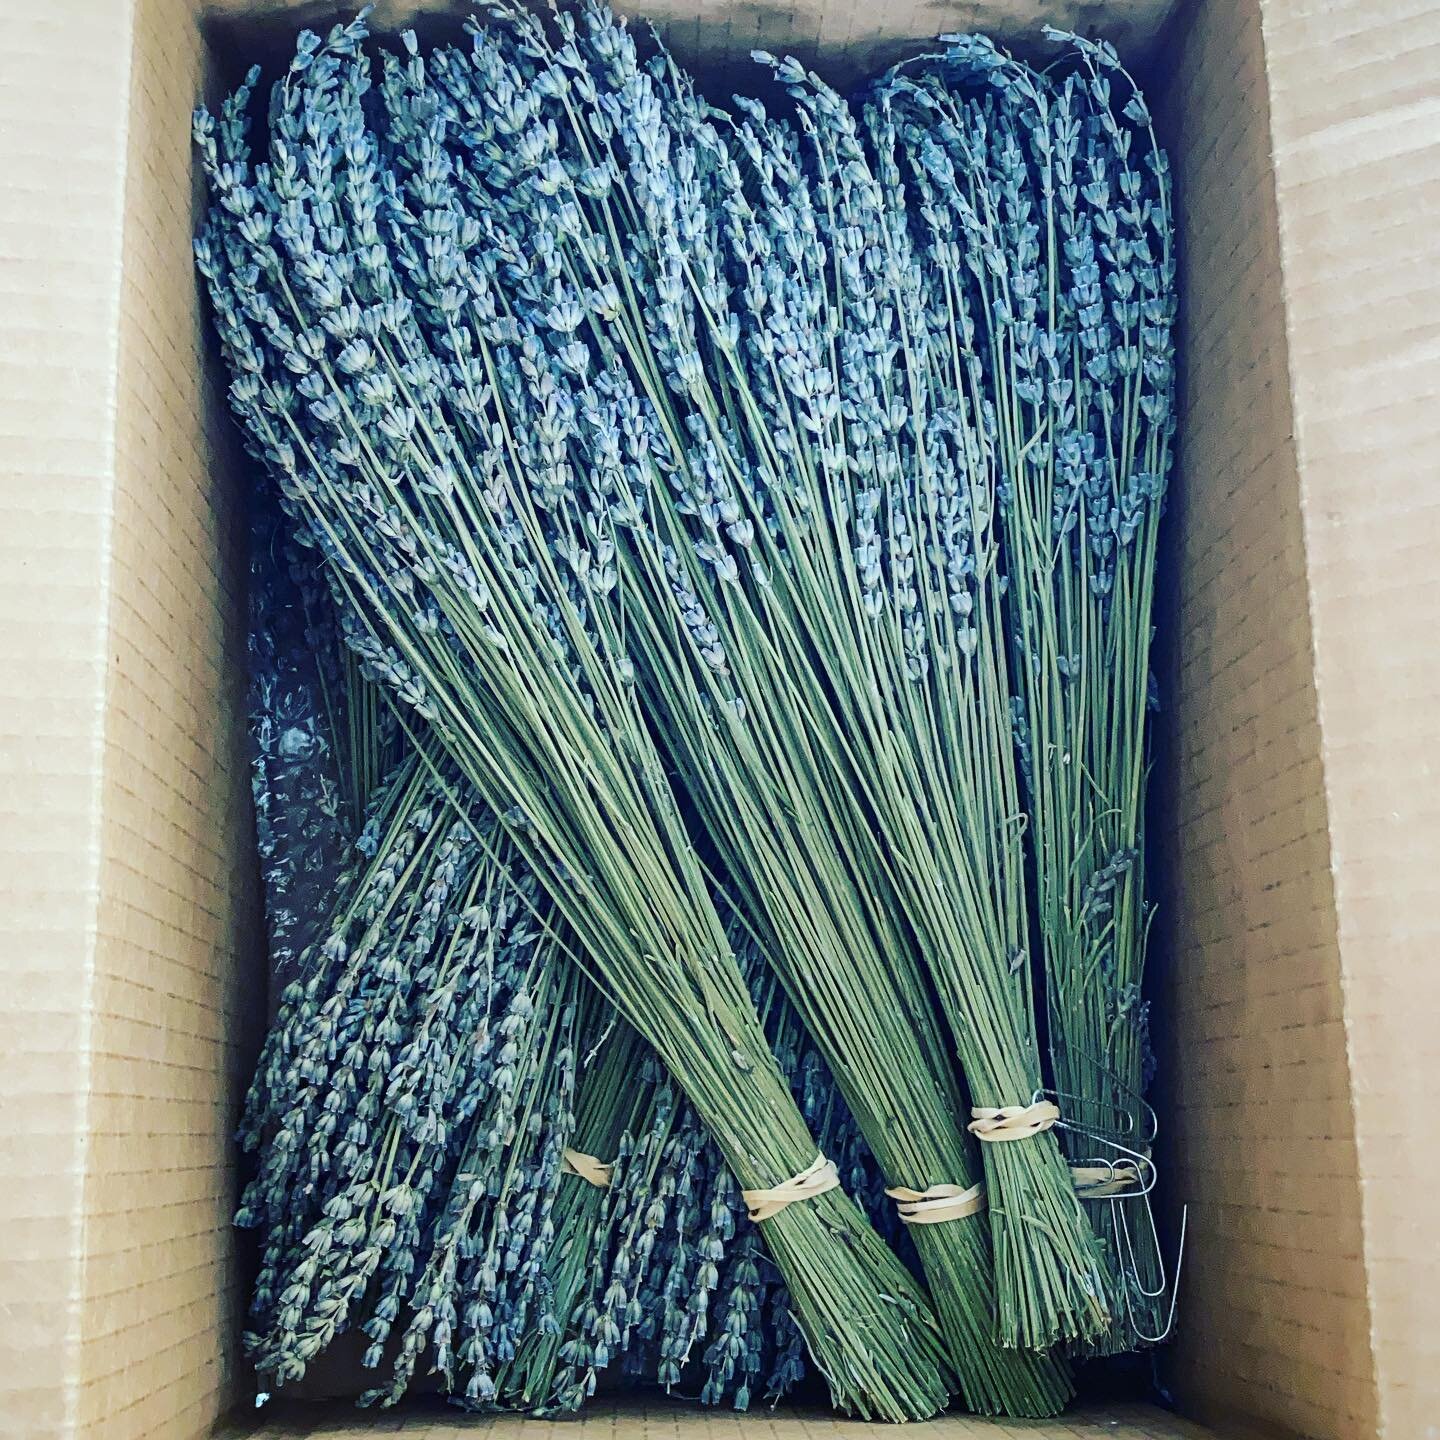 I opened the post box and was instantly met with this wonderful smell!! How gorgeous are these all organic lavender bundles? The best part is they are grown along the Chama river where I grew up. I cannot wait to get busy and work with these. Stay tu